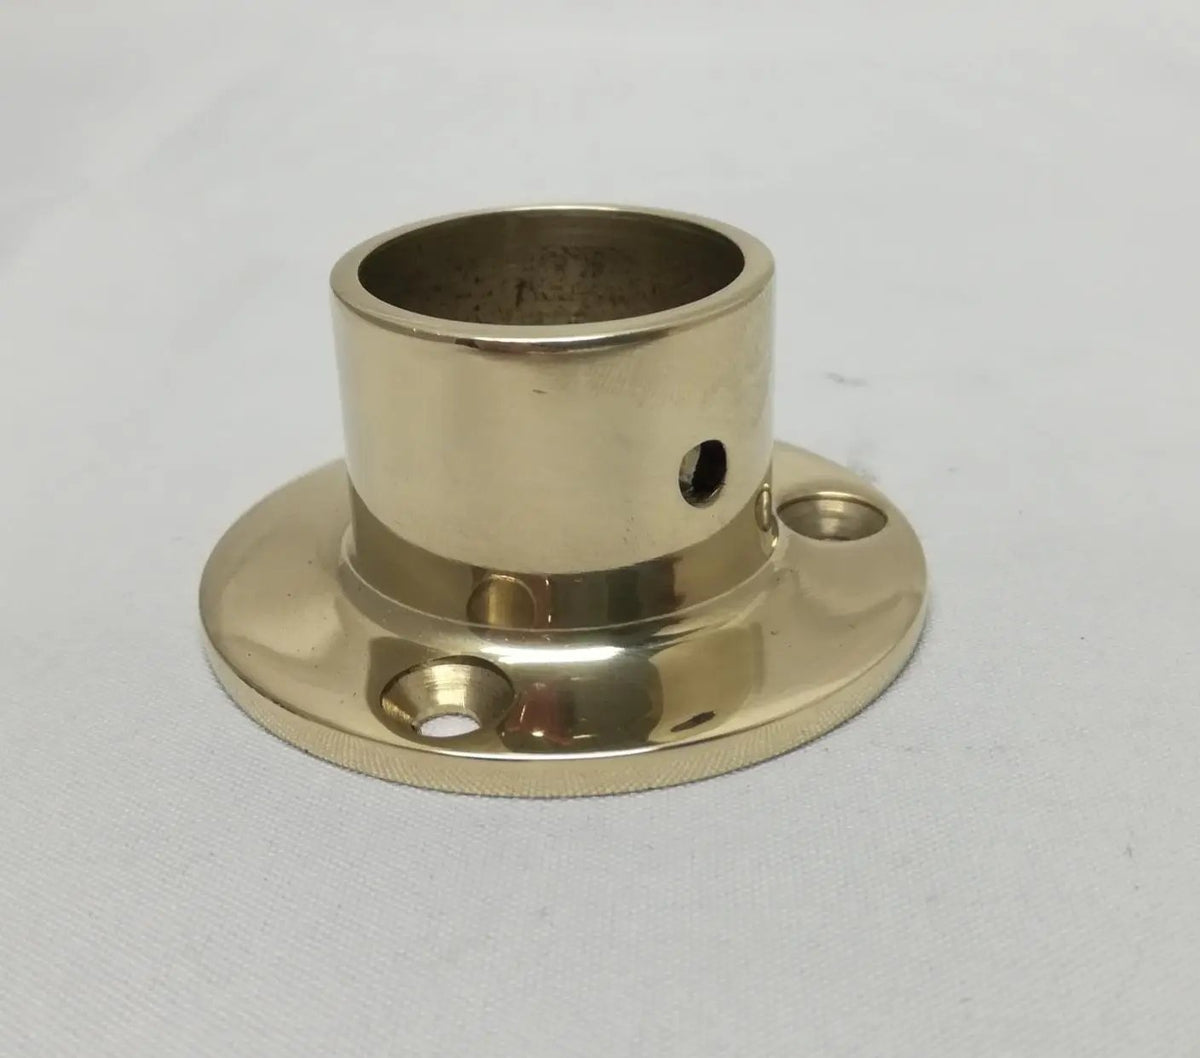 1" Tall Flange for 1" OD Tubing FLANGES AND ANCHORS, COMPONENTS FOR 1" OD TUBING, DRAPERY HARDWARE POLISHEDBRASS Trade Diversified